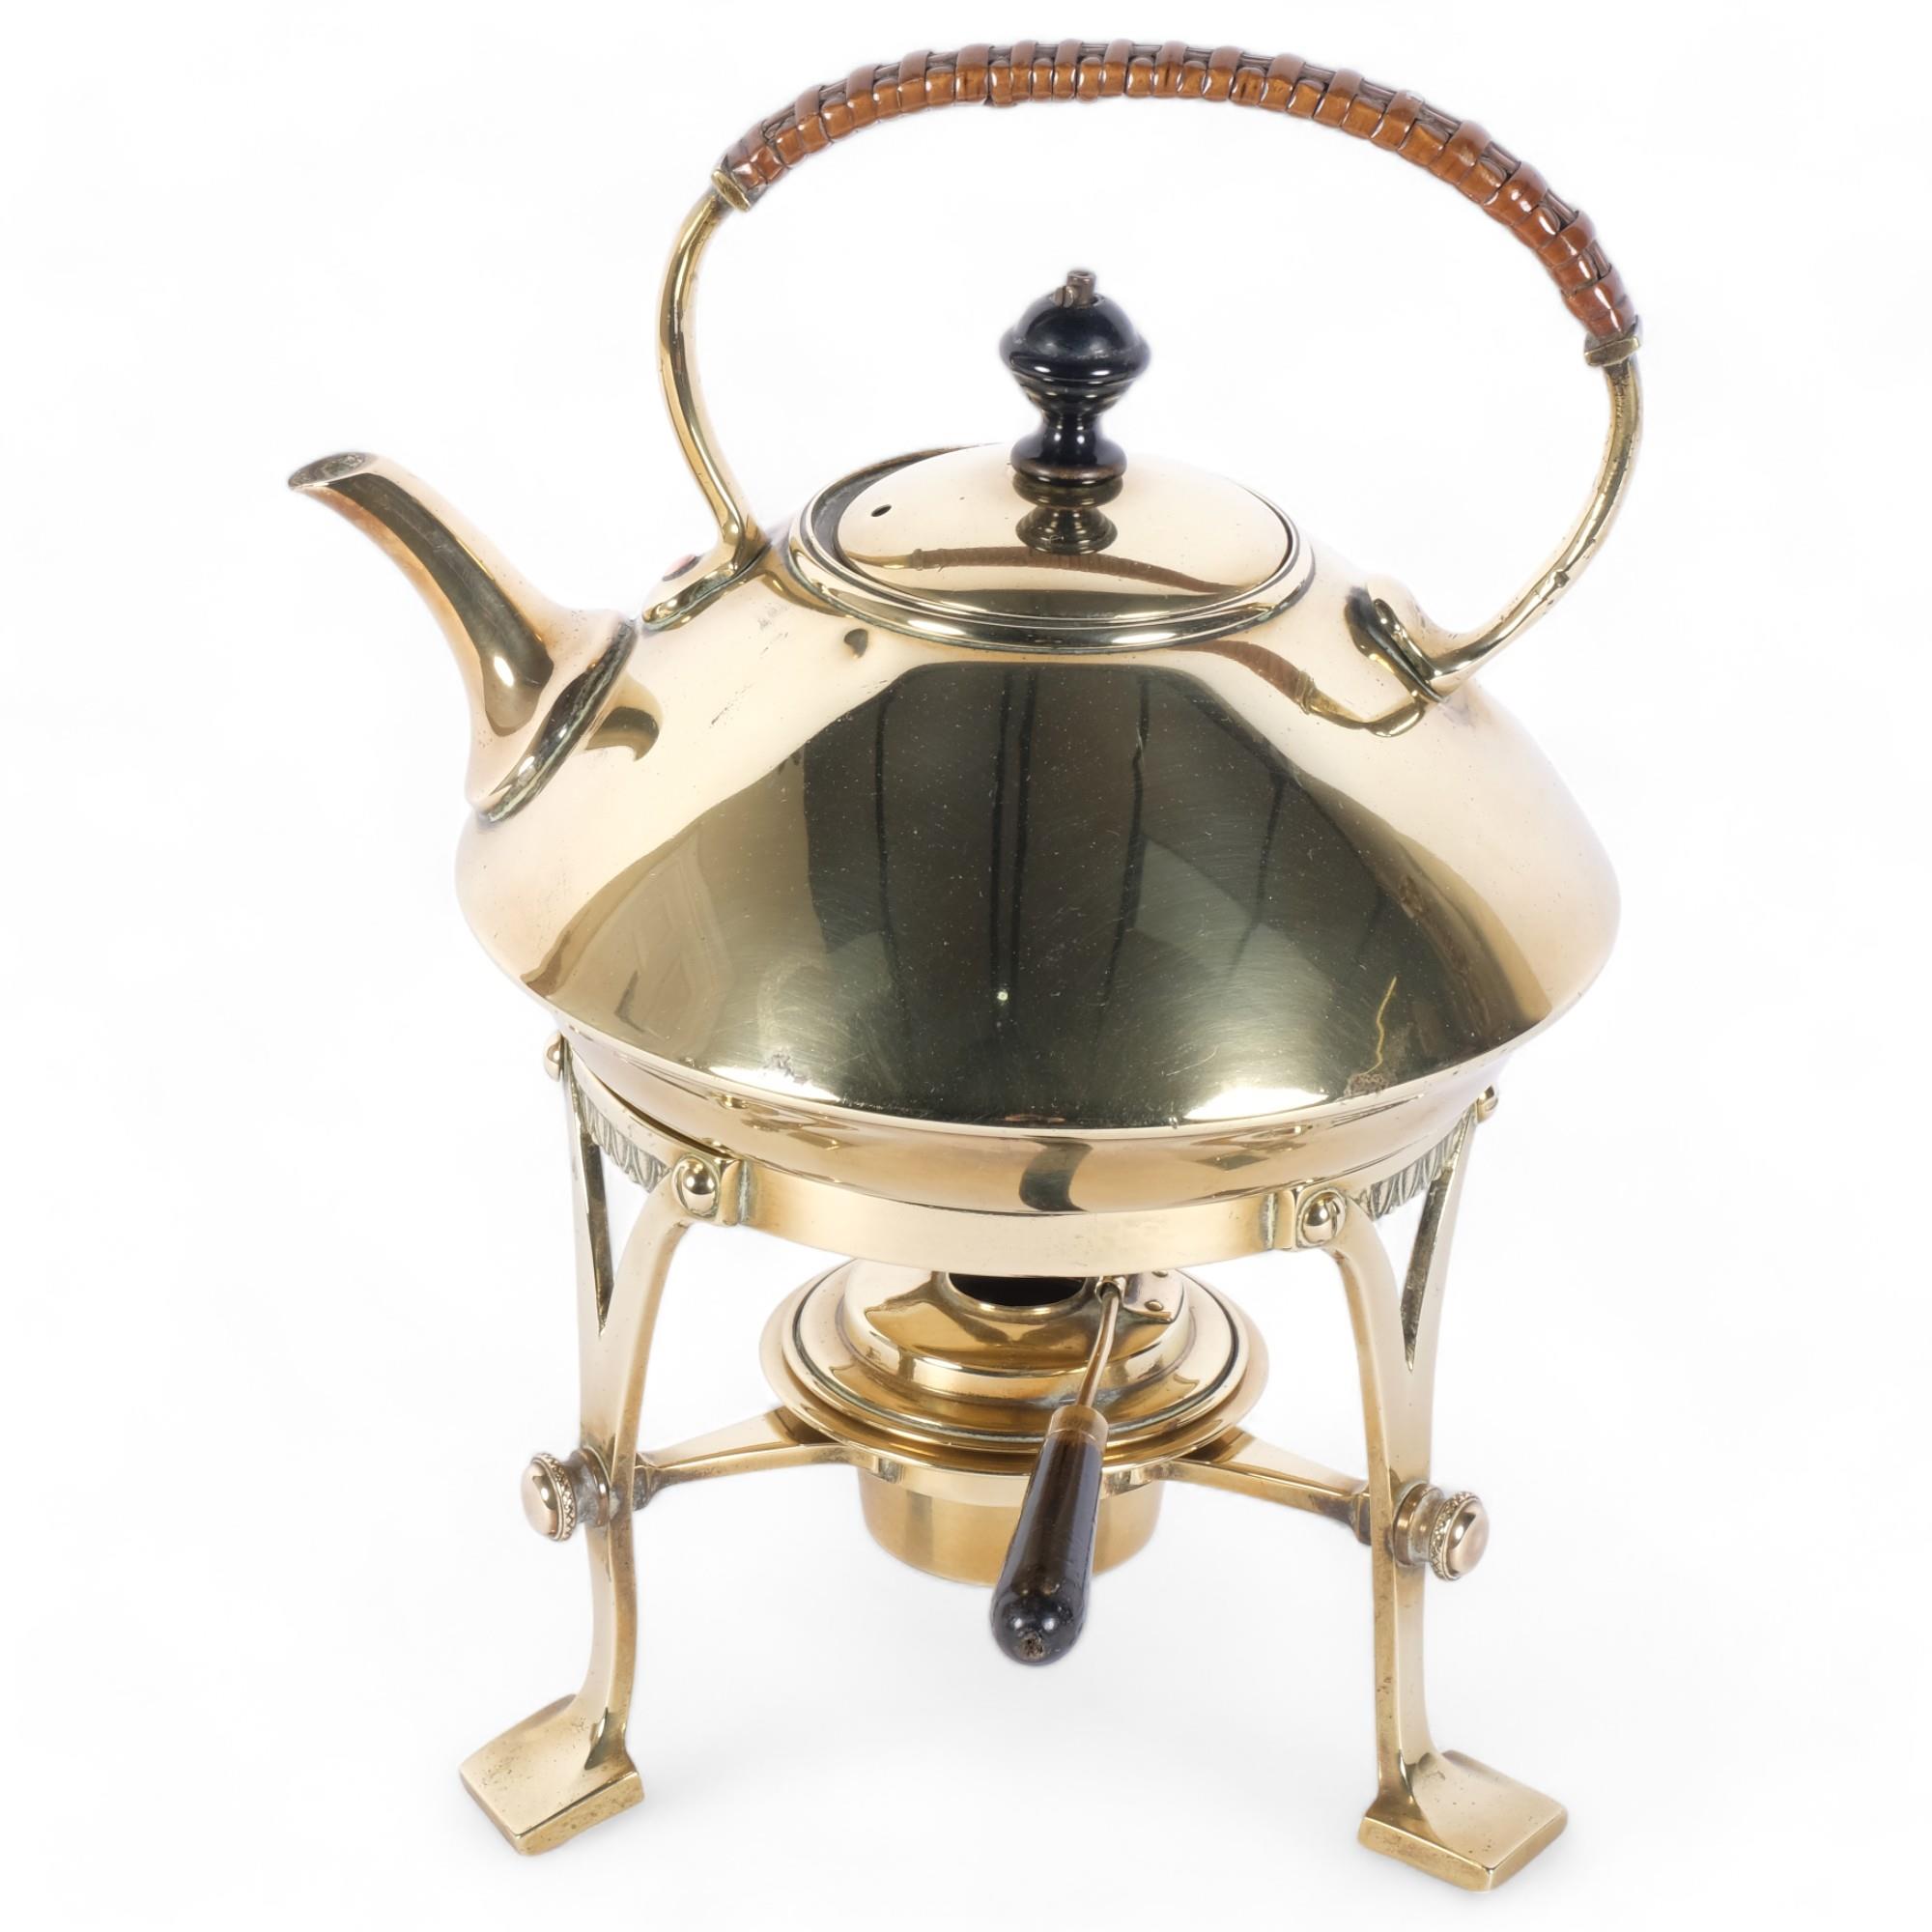 A 19th century Aesthetic Movement brass spirit kettle, in the manner of Christopher Dresser, H28cm